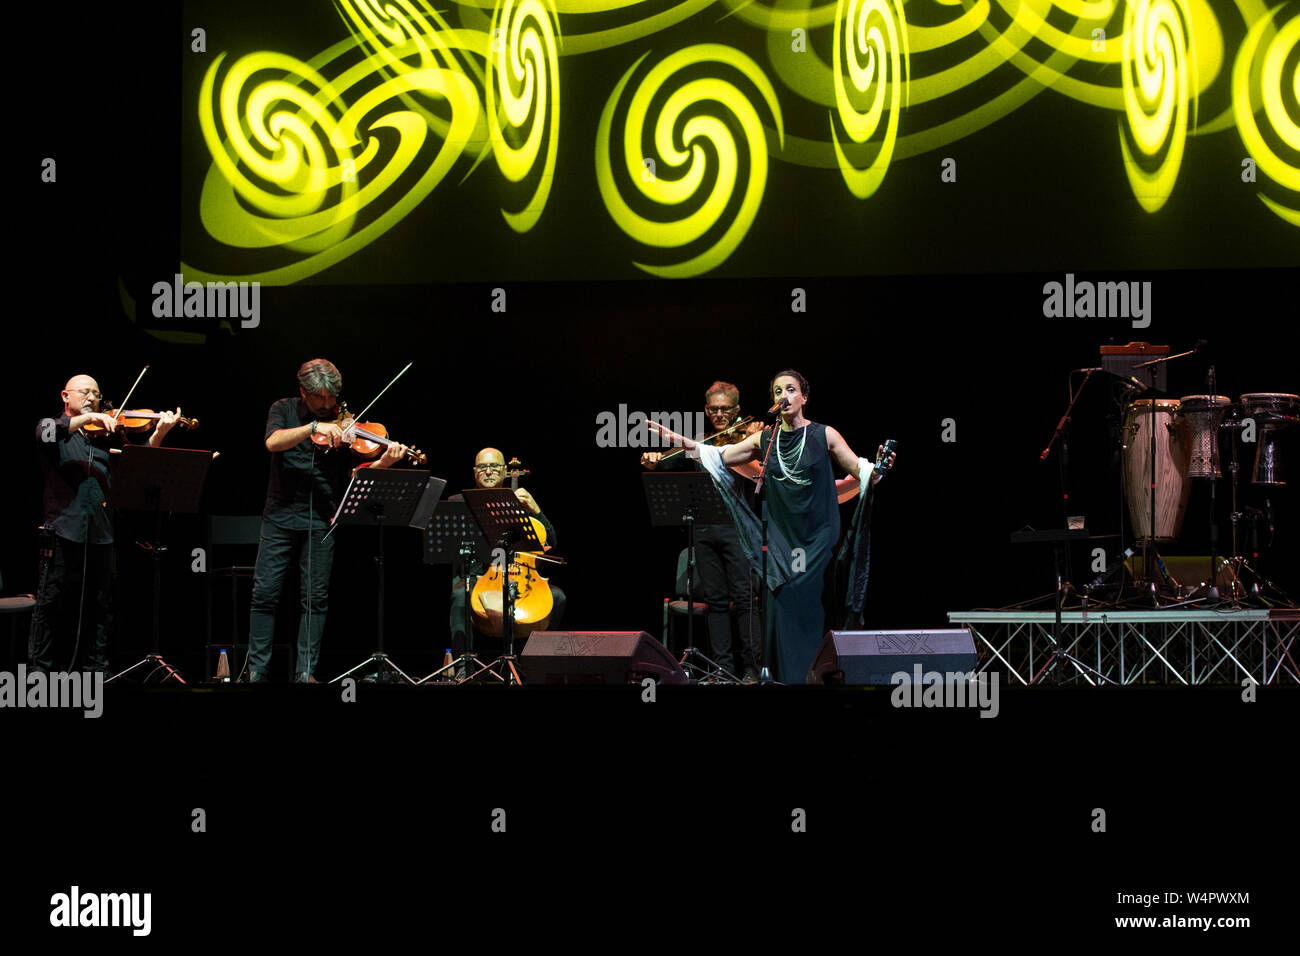 Naples, Italy. 23rd July, 2019. Solis String Quartet sul palco dell'Arena Flegrea Napoli. Known in Israel with her baptismal name Achinoam Nini, Noa is Israel's leading international recording artist and artist. Born in Tel Aviv in 1969, Noa lived in New York from the age of 2 until she returned to Israel at the age of 17. His family is originally from Yemen. After Credit: Massimo Solimene/Pacific Press/Alamy Live News Stock Photo